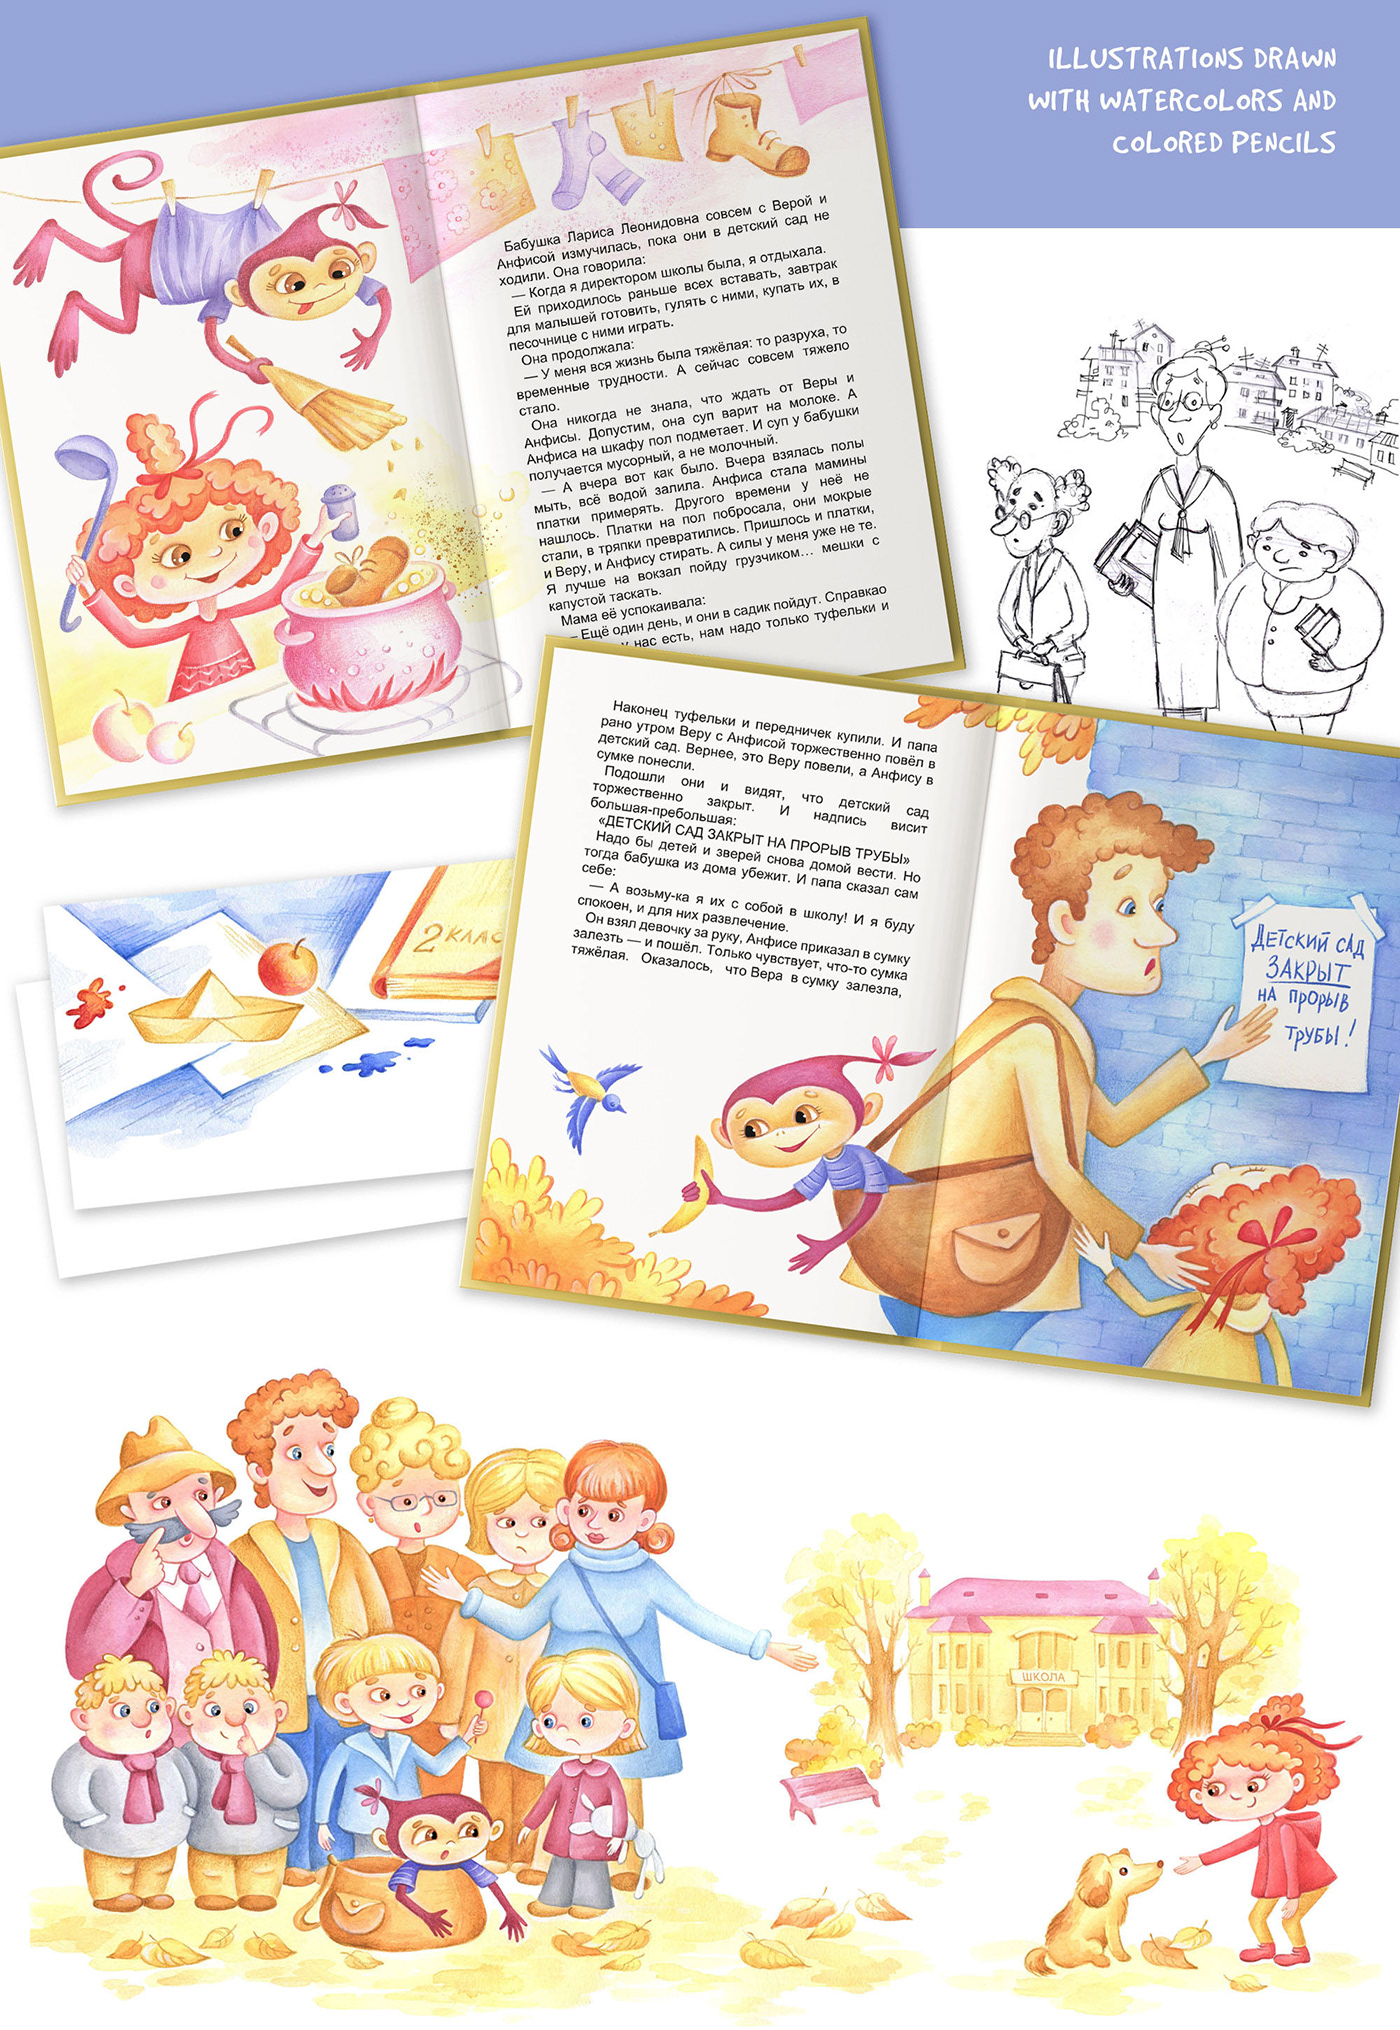 Character design  cover book ILLUSTRATION  photoshop watercolor children illustration children's book Character coverbook